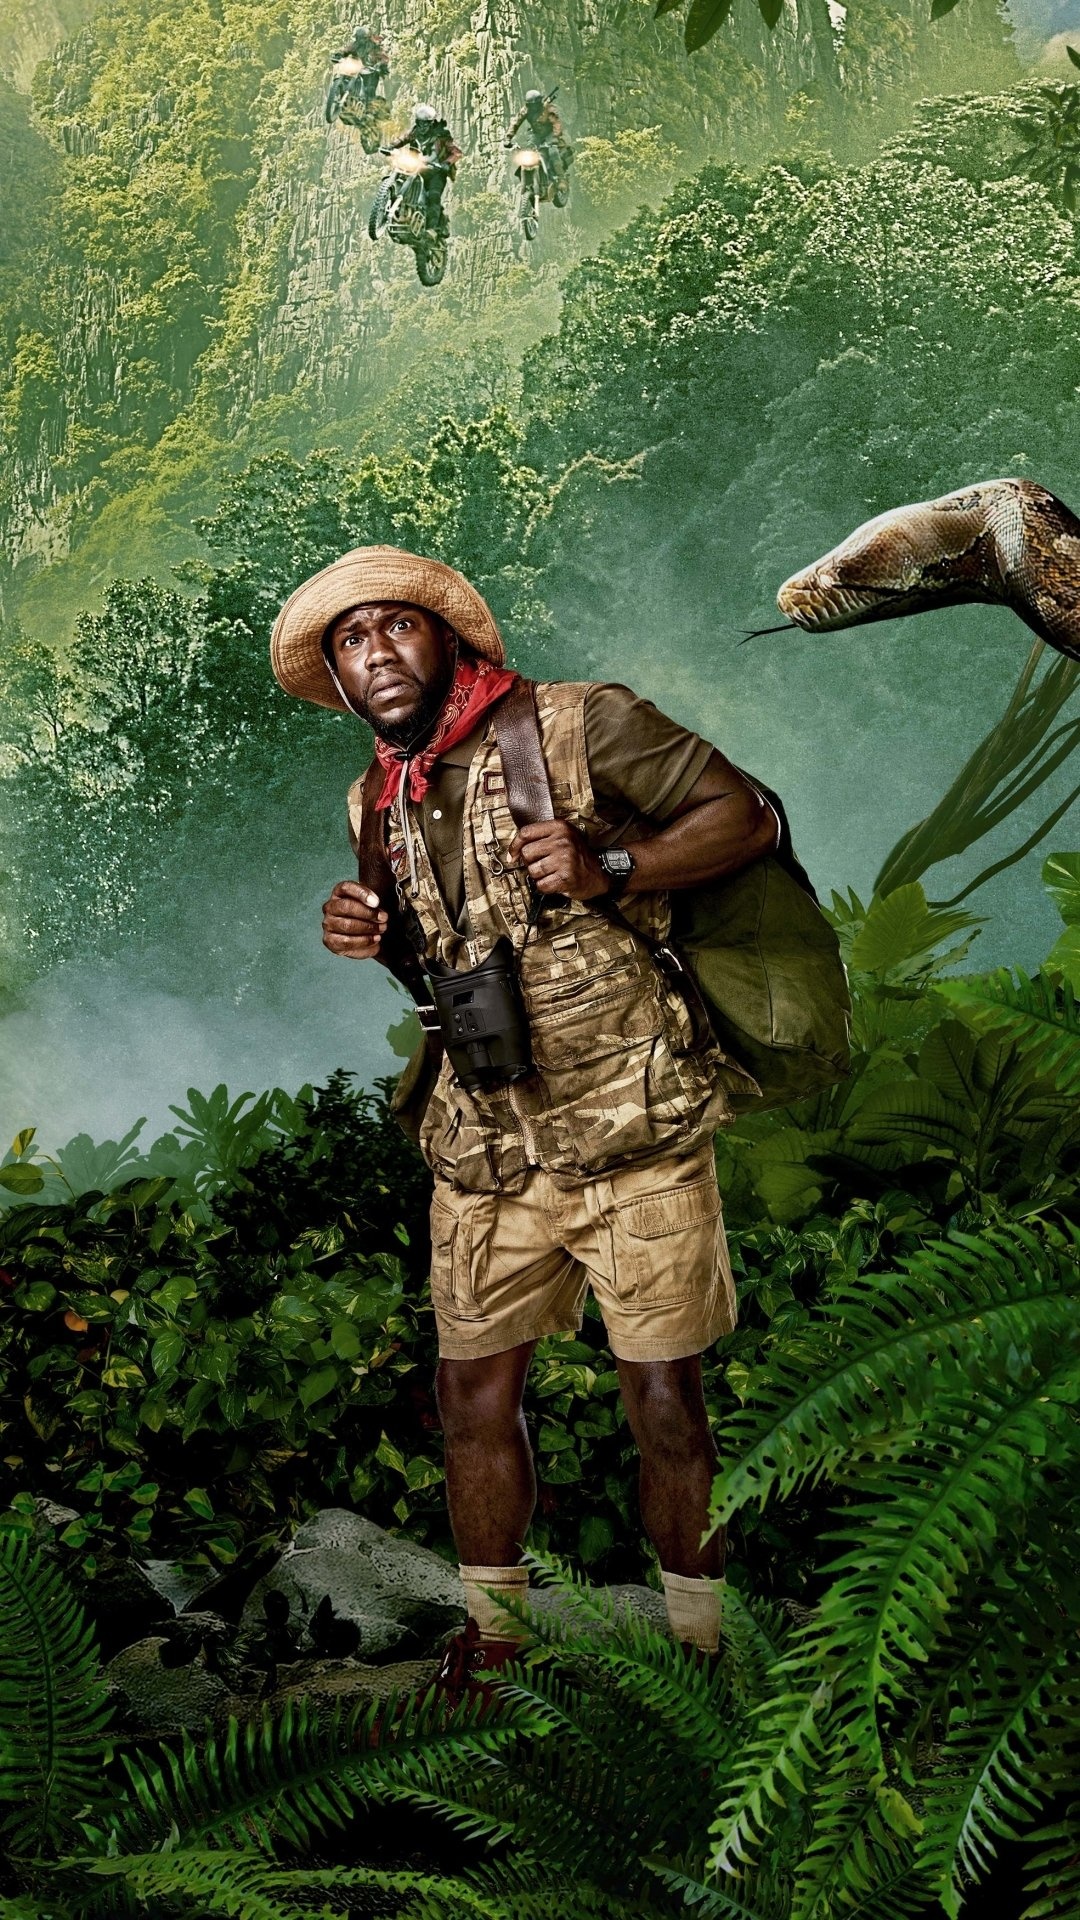 Jumanji: Welcome to the Jungle, Thrilling phone backgrounds, Exciting adventure, Wild jungle, 1080x1920 Full HD Phone